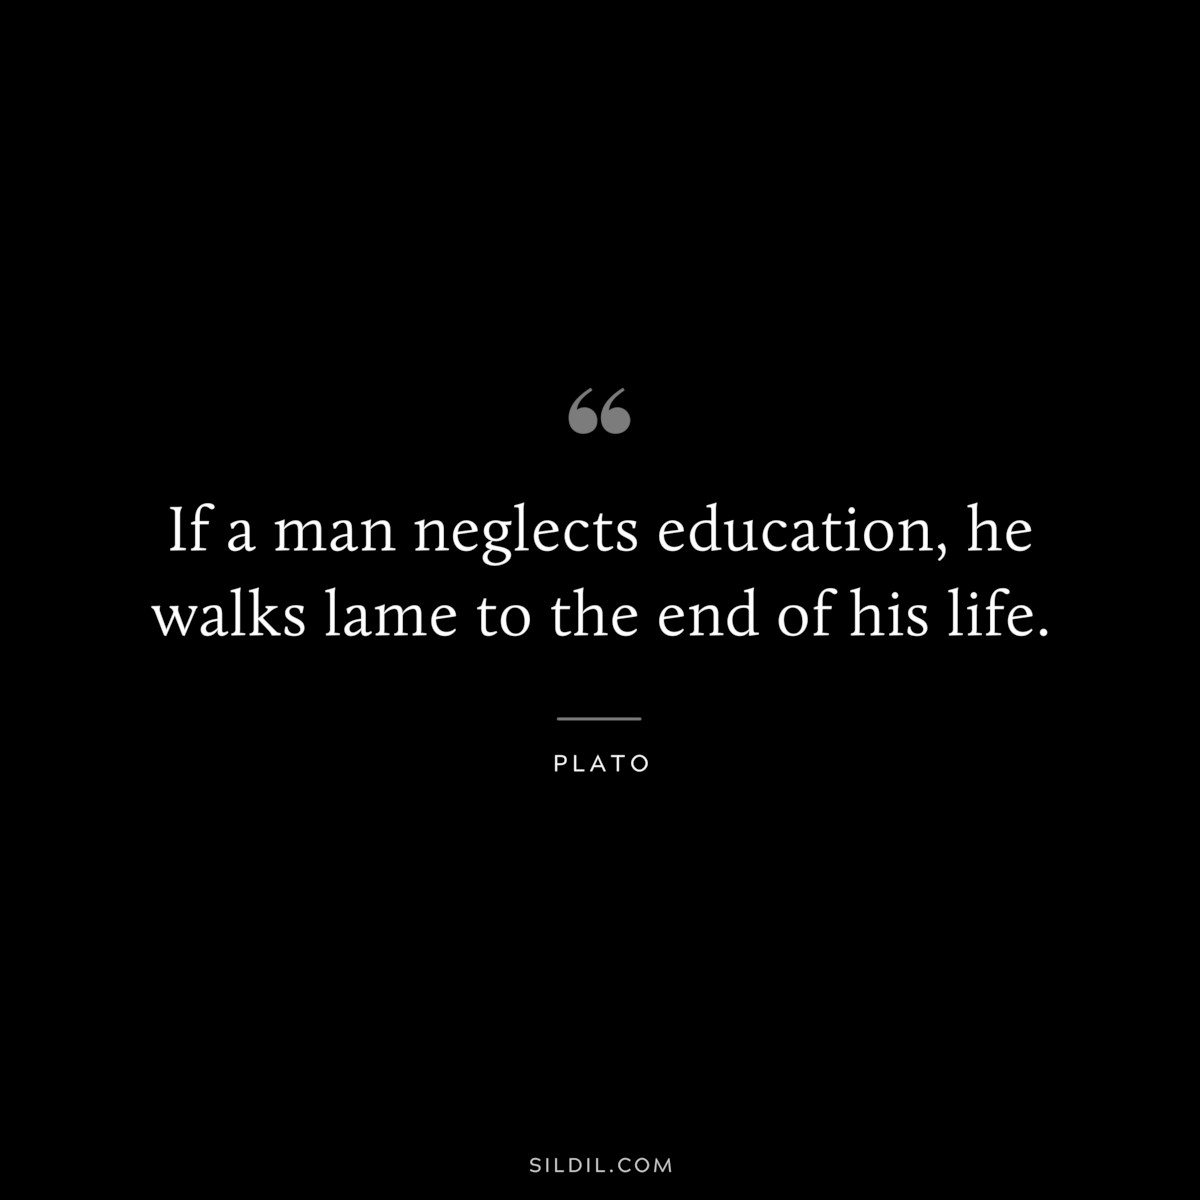 If a man neglects education, he walks lame to the end of his life. ― Plato